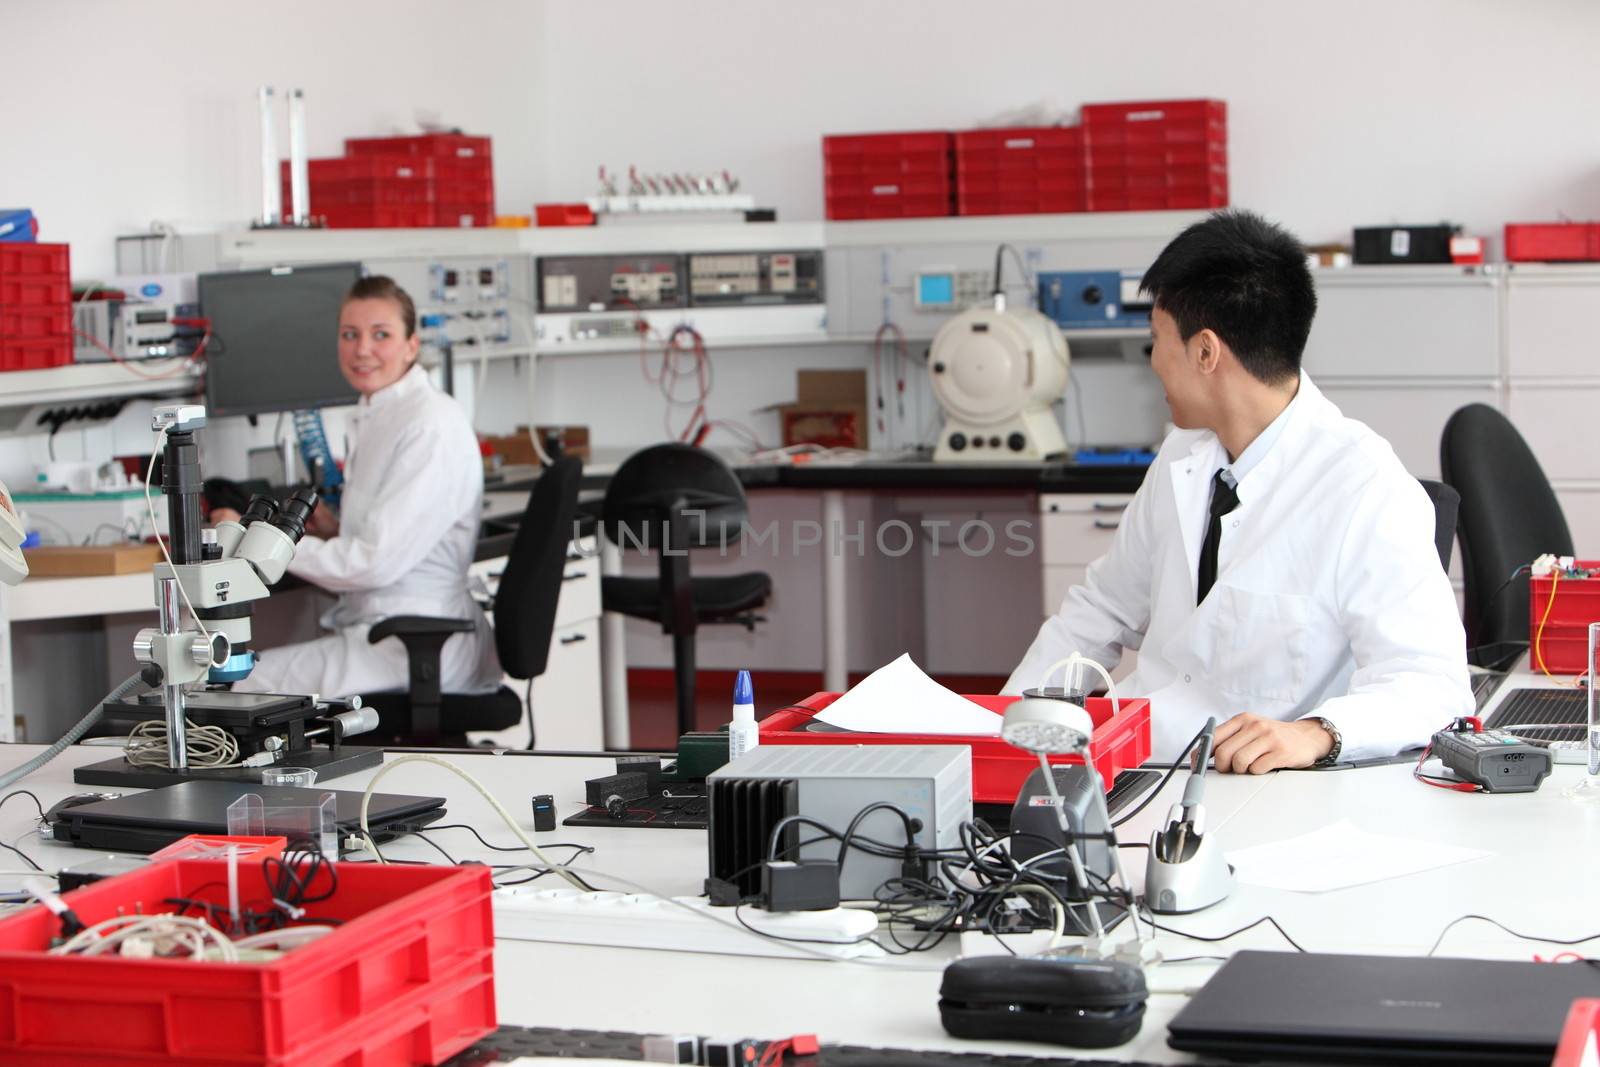 Technicians working in a modern laboratory by Farina6000